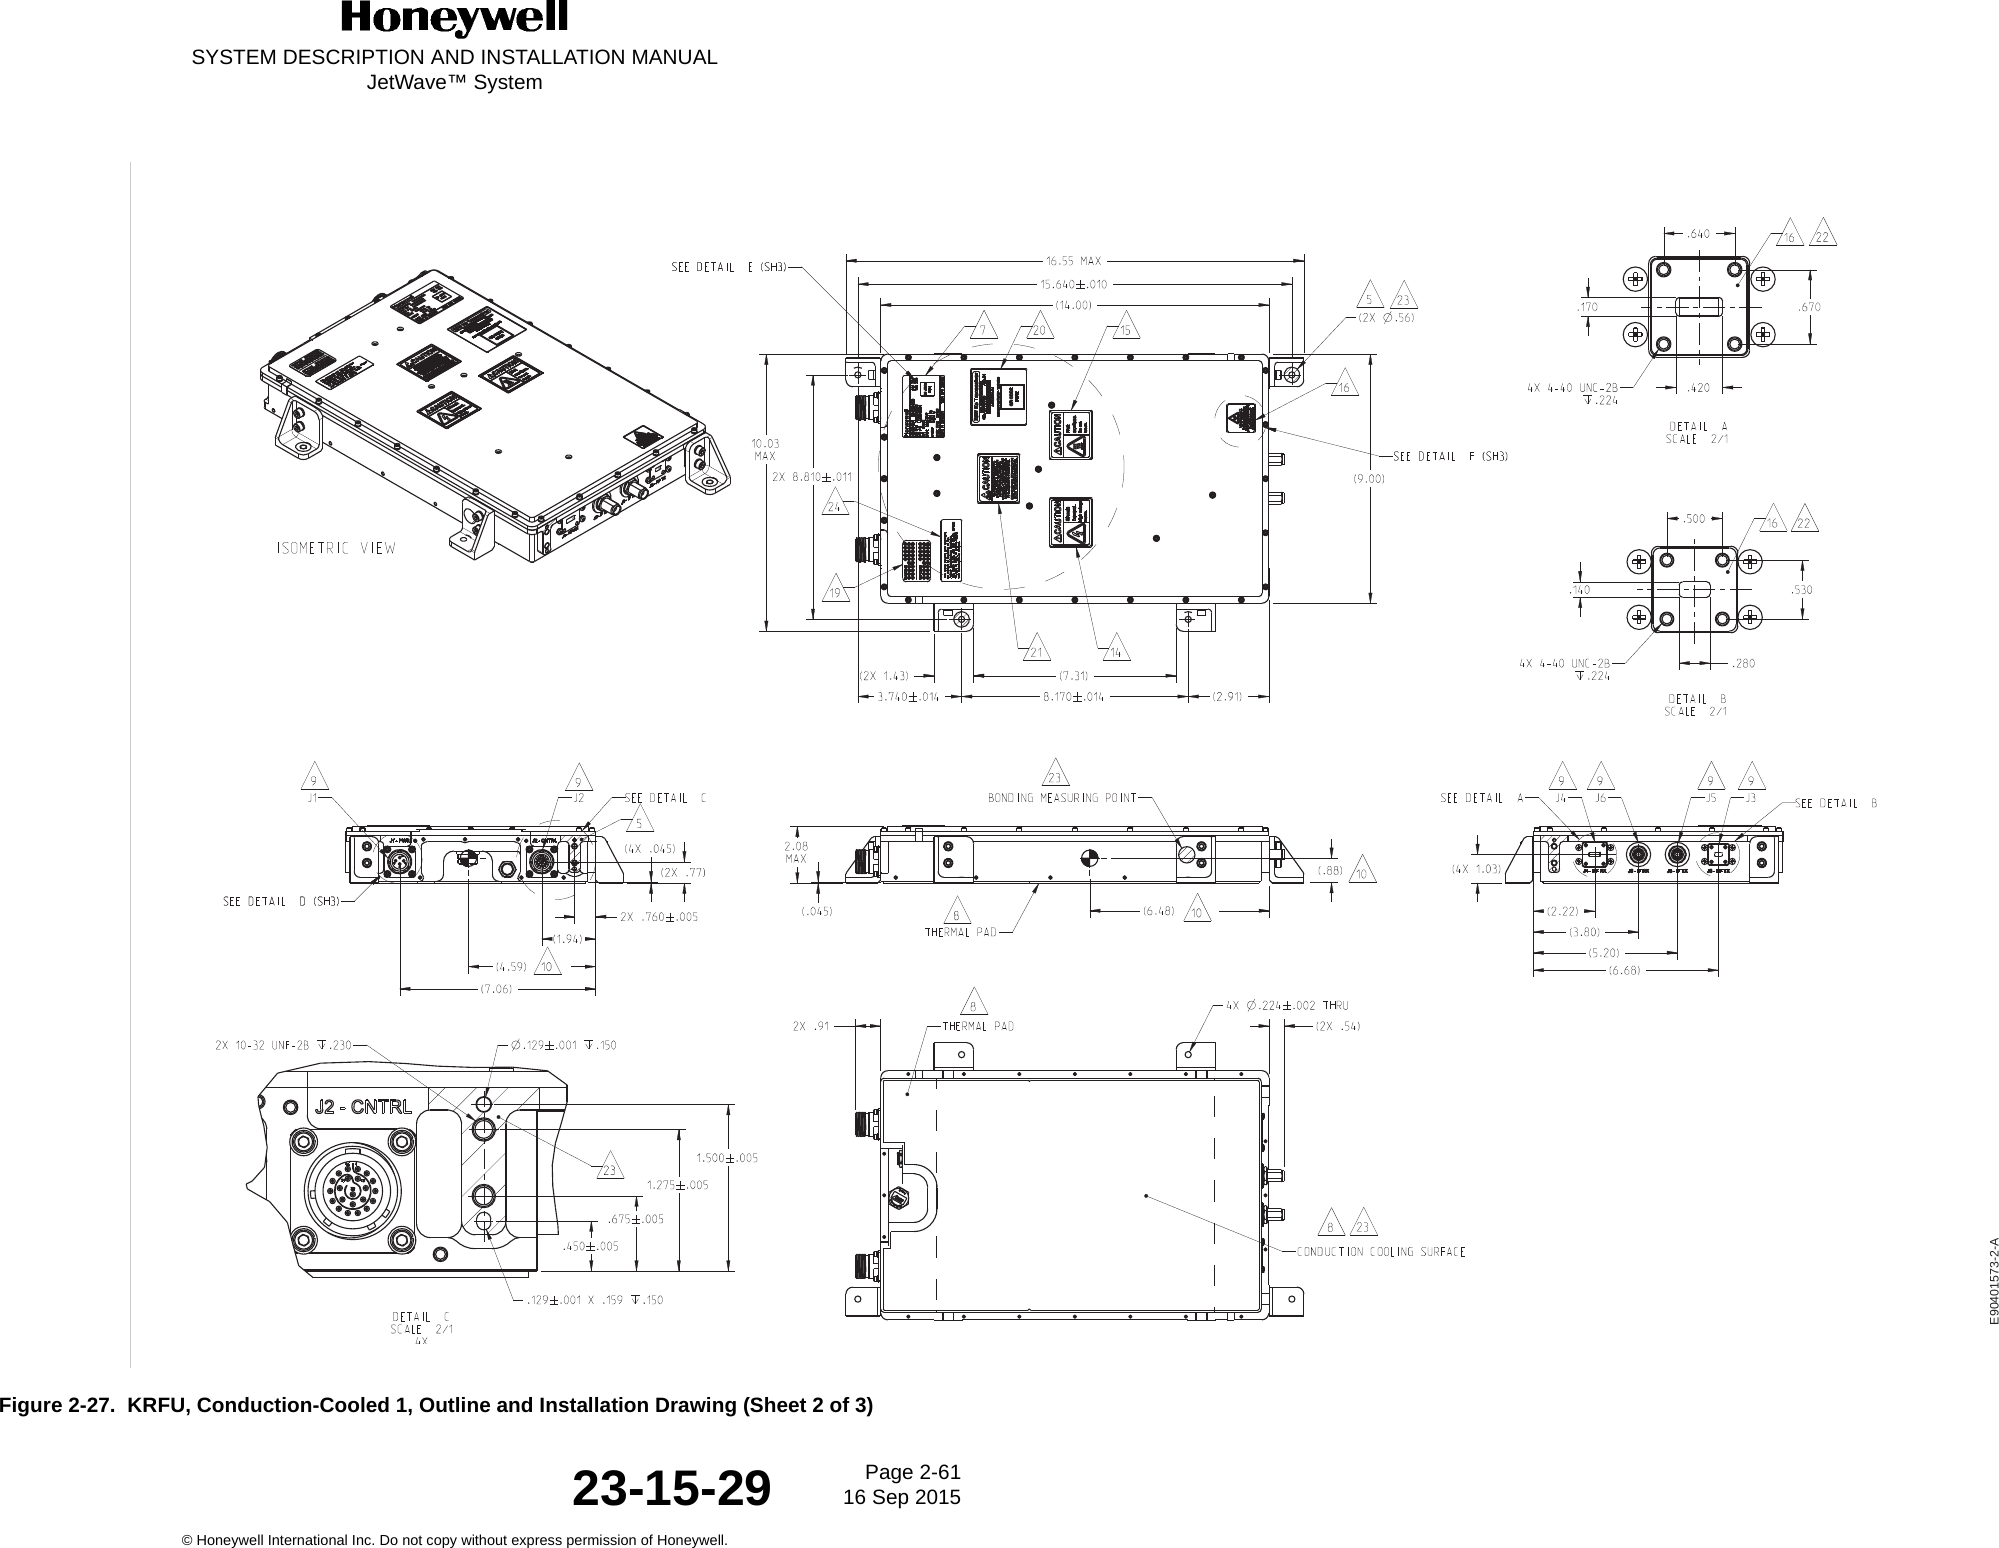 SYSTEM DESCRIPTION AND INSTALLATION MANUALJetWave™ SystemPage 2-61 16 Sep 2015© Honeywell International Inc. Do not copy without express permission of Honeywell.23-15-29Figure 2-27.  KRFU, Conduction-Cooled 1, Outline and Installation Drawing (Sheet 2 of 3)E90401573-2-A